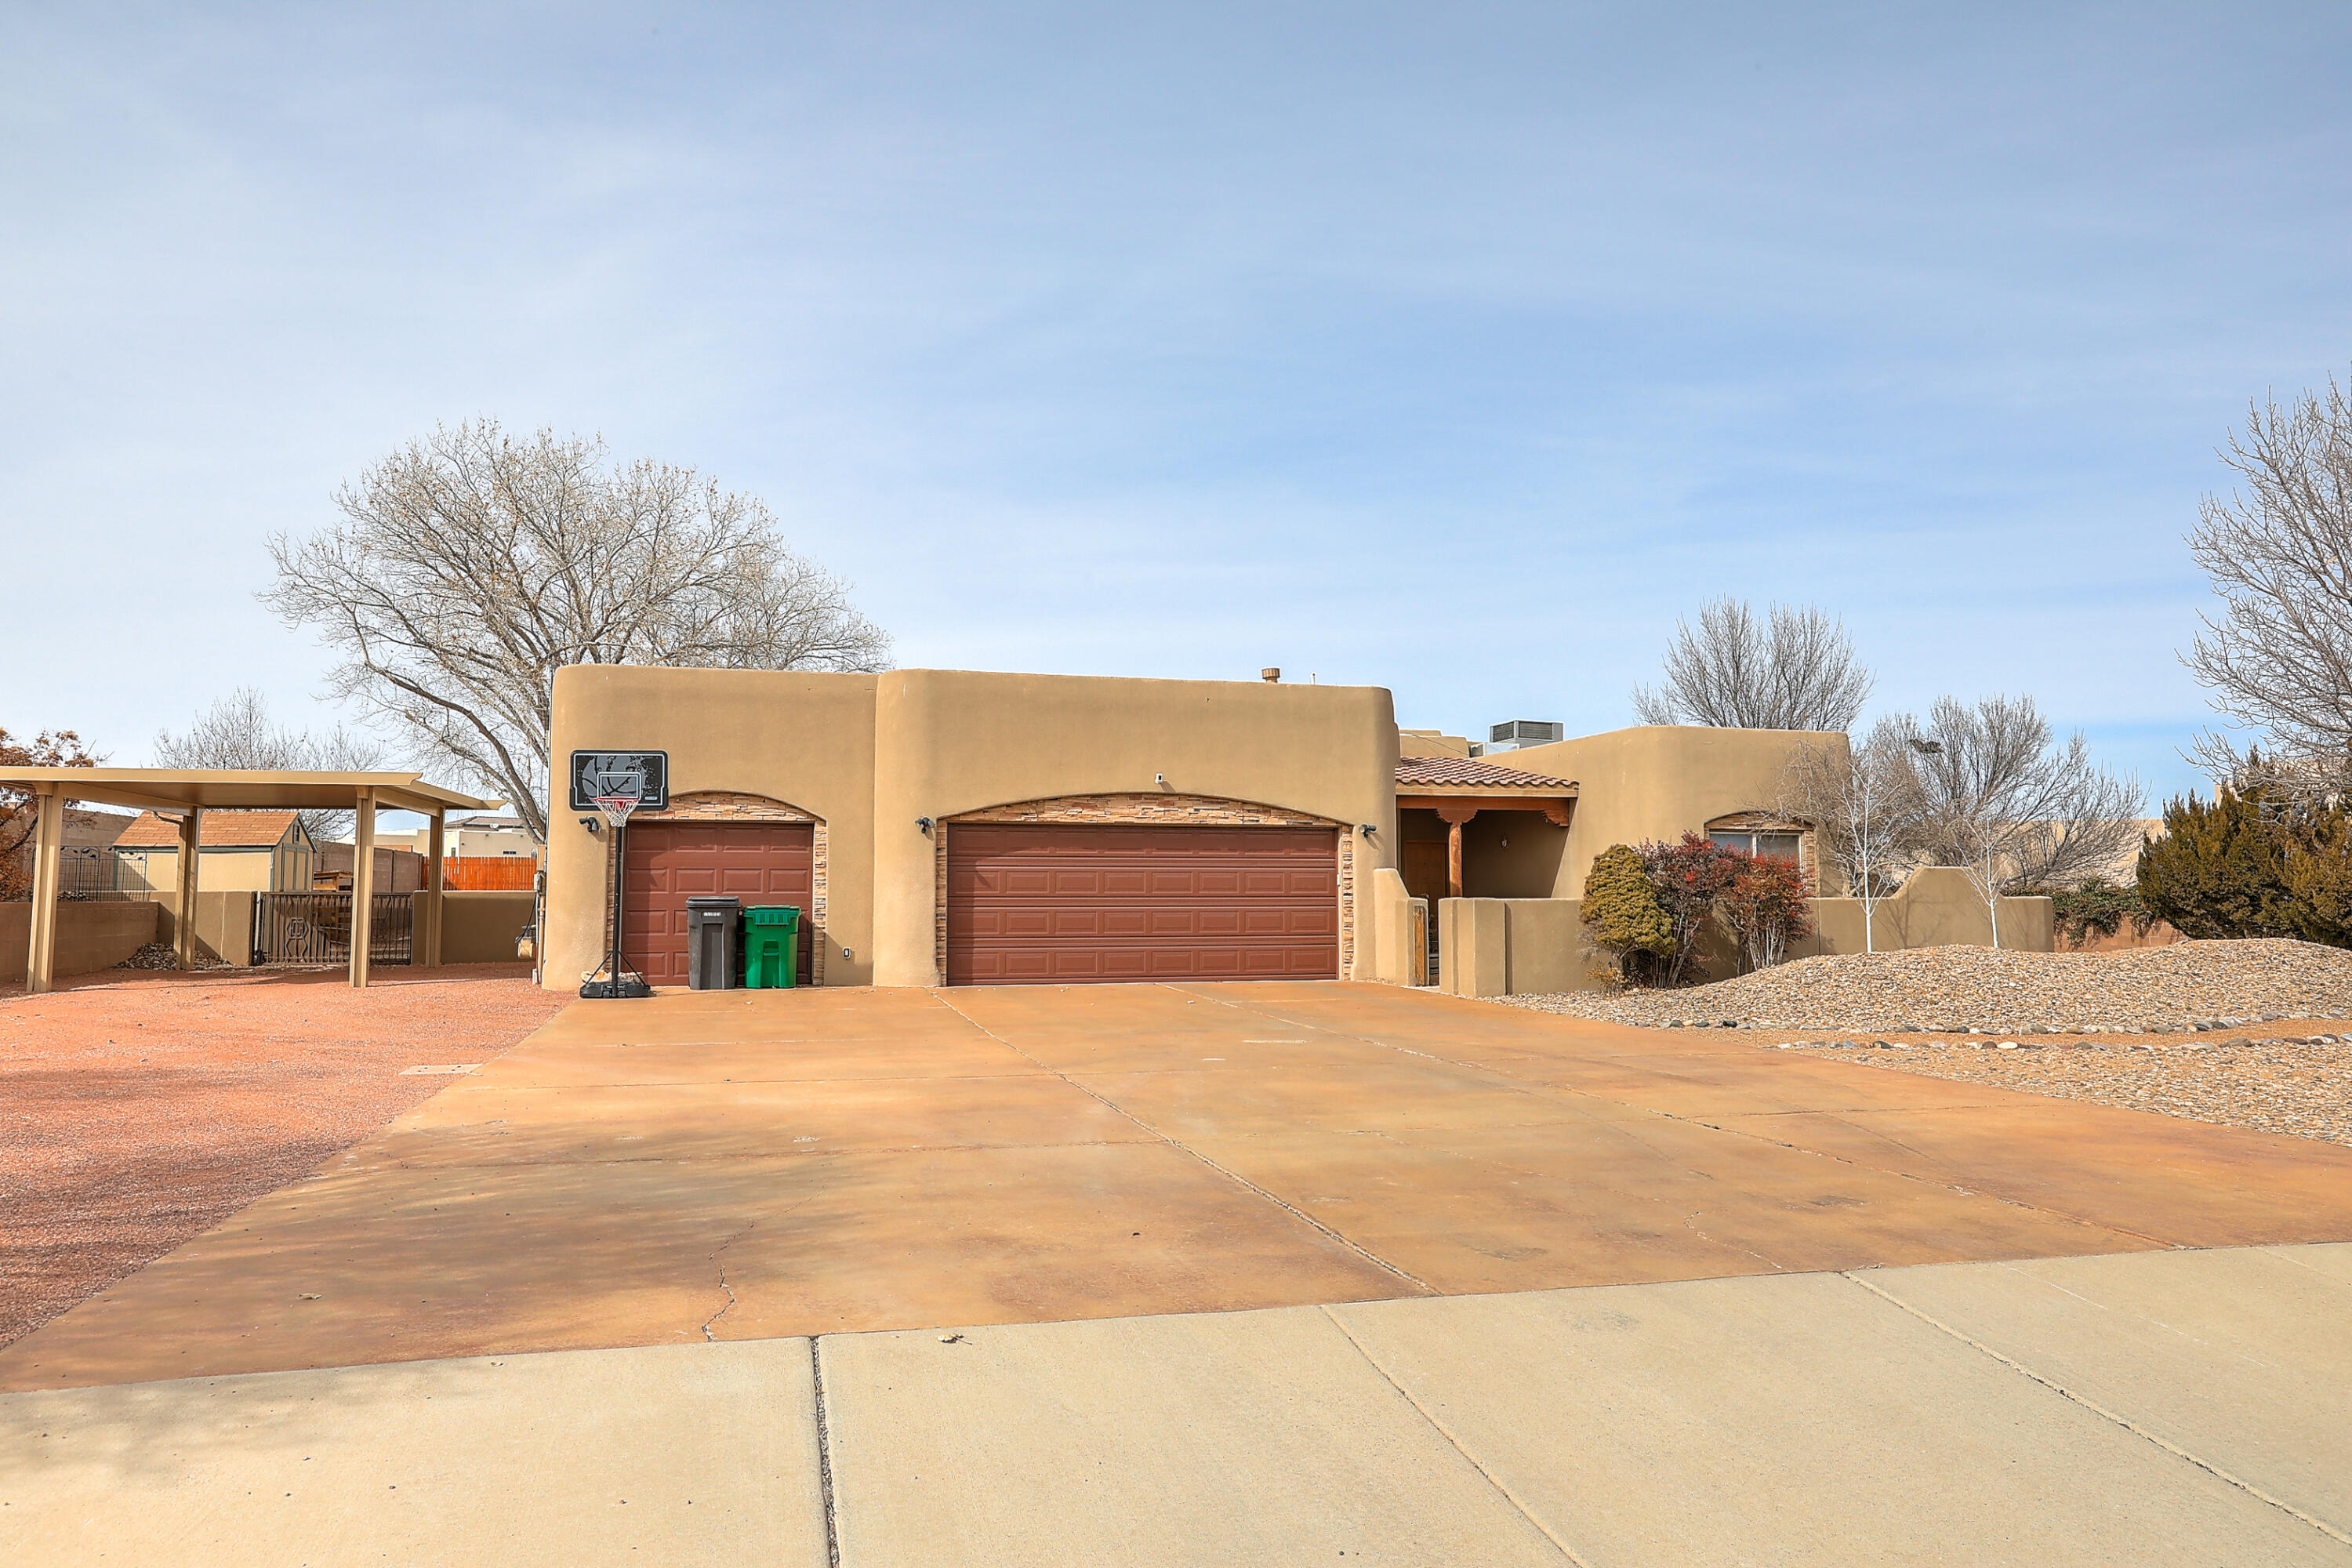 OPEN HOUSE SATURDAY MARCH 2 FROM 11:00-1:00 PM AND 2:00-4:00 PM!!! Welcome to this stunning home in the heart of Rio Rancho! This property offers a perfect blend of convenience and tranquility, with its proximity to schools, restaurants, a swimming pool, and hospitals. The spacious layout and privacy make it an ideal retreat, providing a peaceful sanctuary for you and your family. The outdoor space is a true gem, featuring a pizza oven, custom barbecue, and serene mountain views, creating the perfect setting for outdoor gatherings and relaxation. Inside, the recently remodeled kitchen boasts new cabinetry, appliances, fixtures, and countertops, providing a modern and functional space for cooking and entertaining.